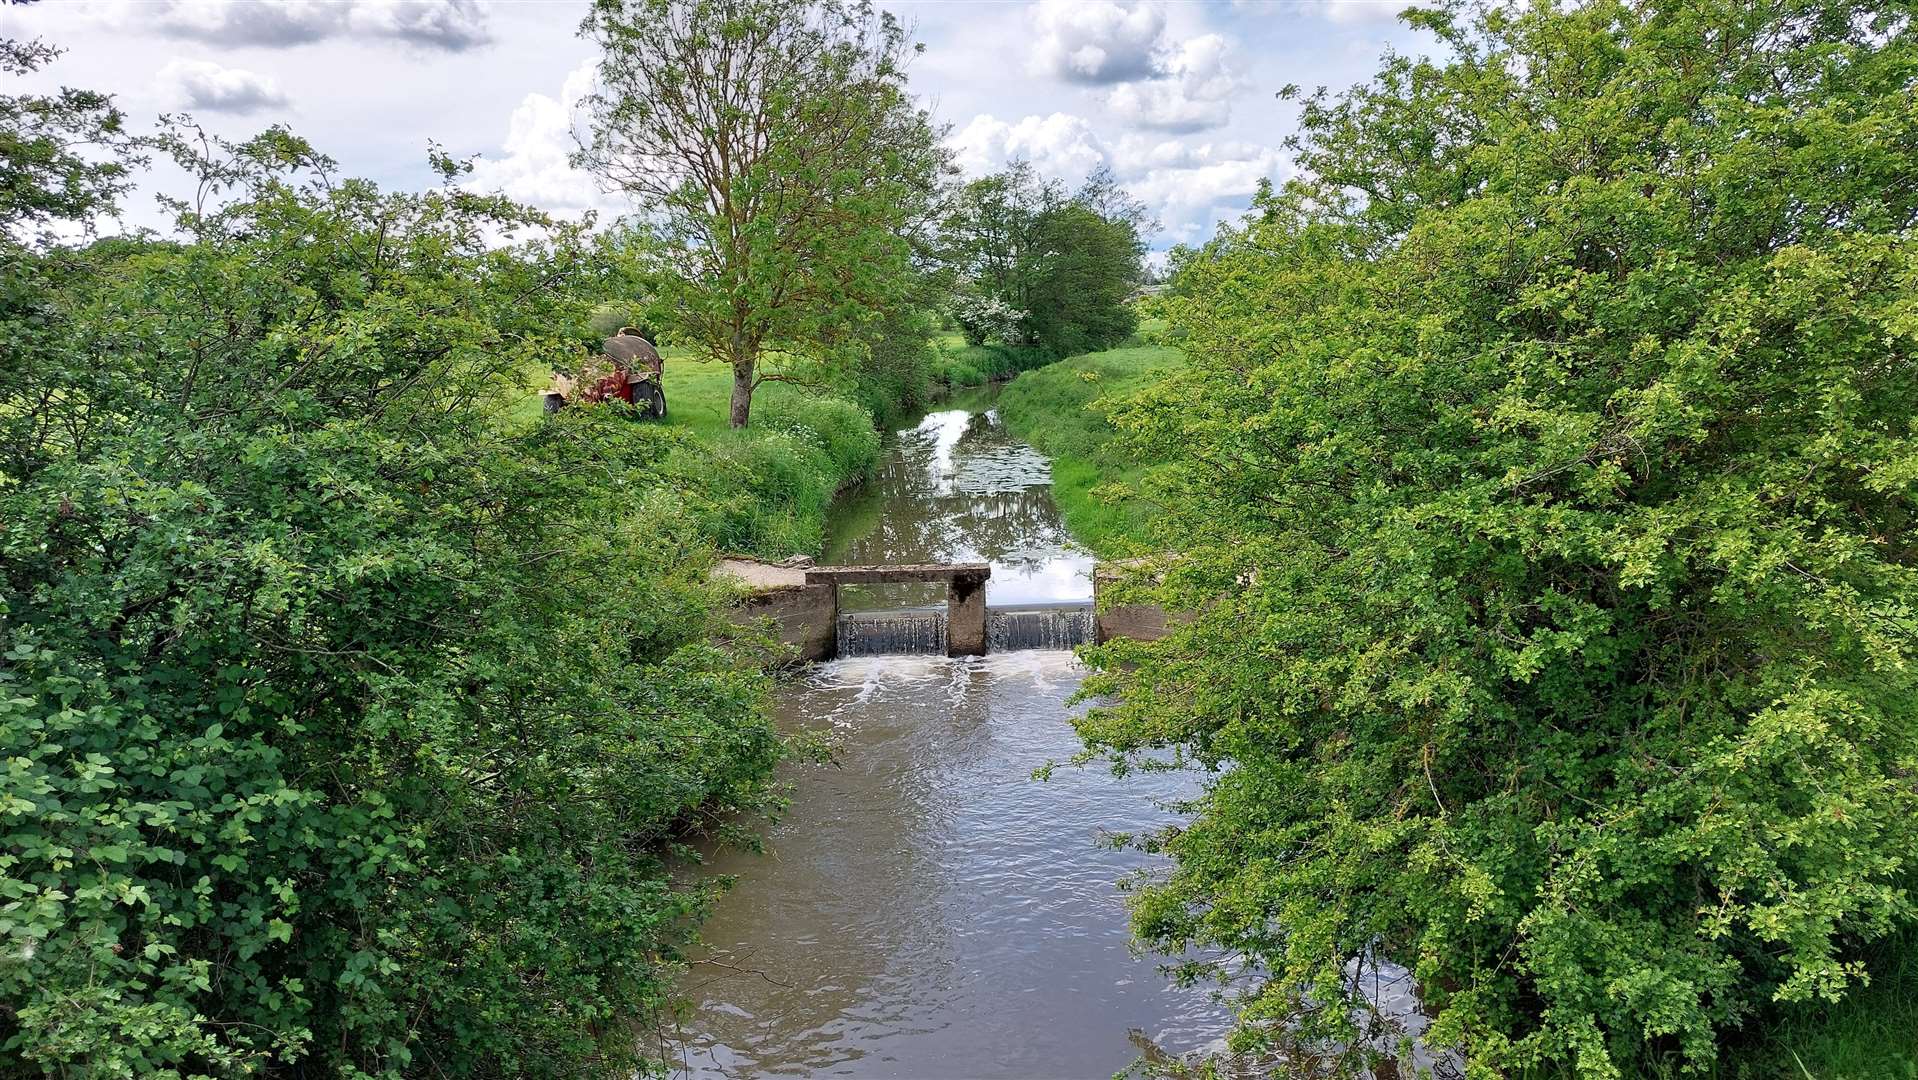 The Hexden Channel was polluted by treatment works in Sandhurst and Hawkhurst